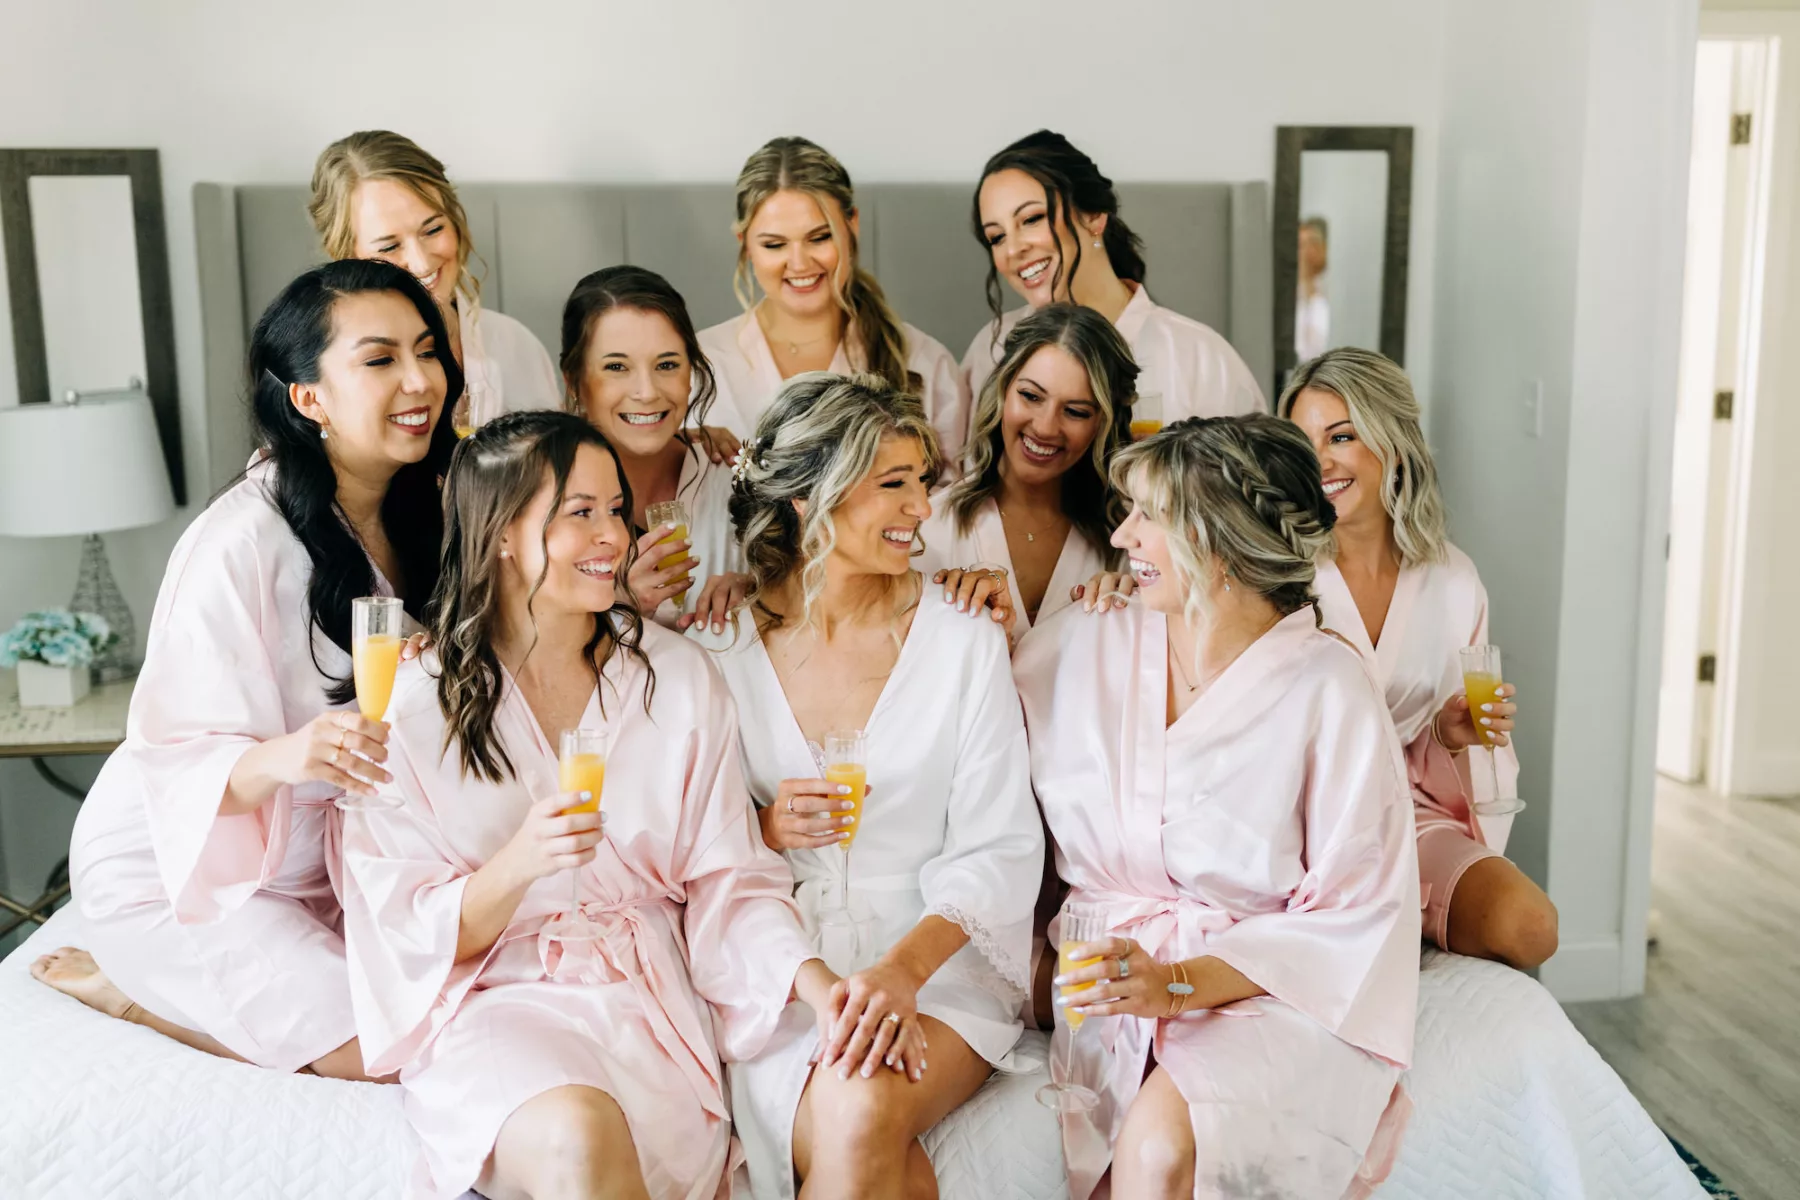 Bride and Bridesmaids Getting Ready Wedding Portrait | Matching Blush Robe Ideas | Tampa Bay Hair and Makeup Artist Femme Akoi Beauty Studio